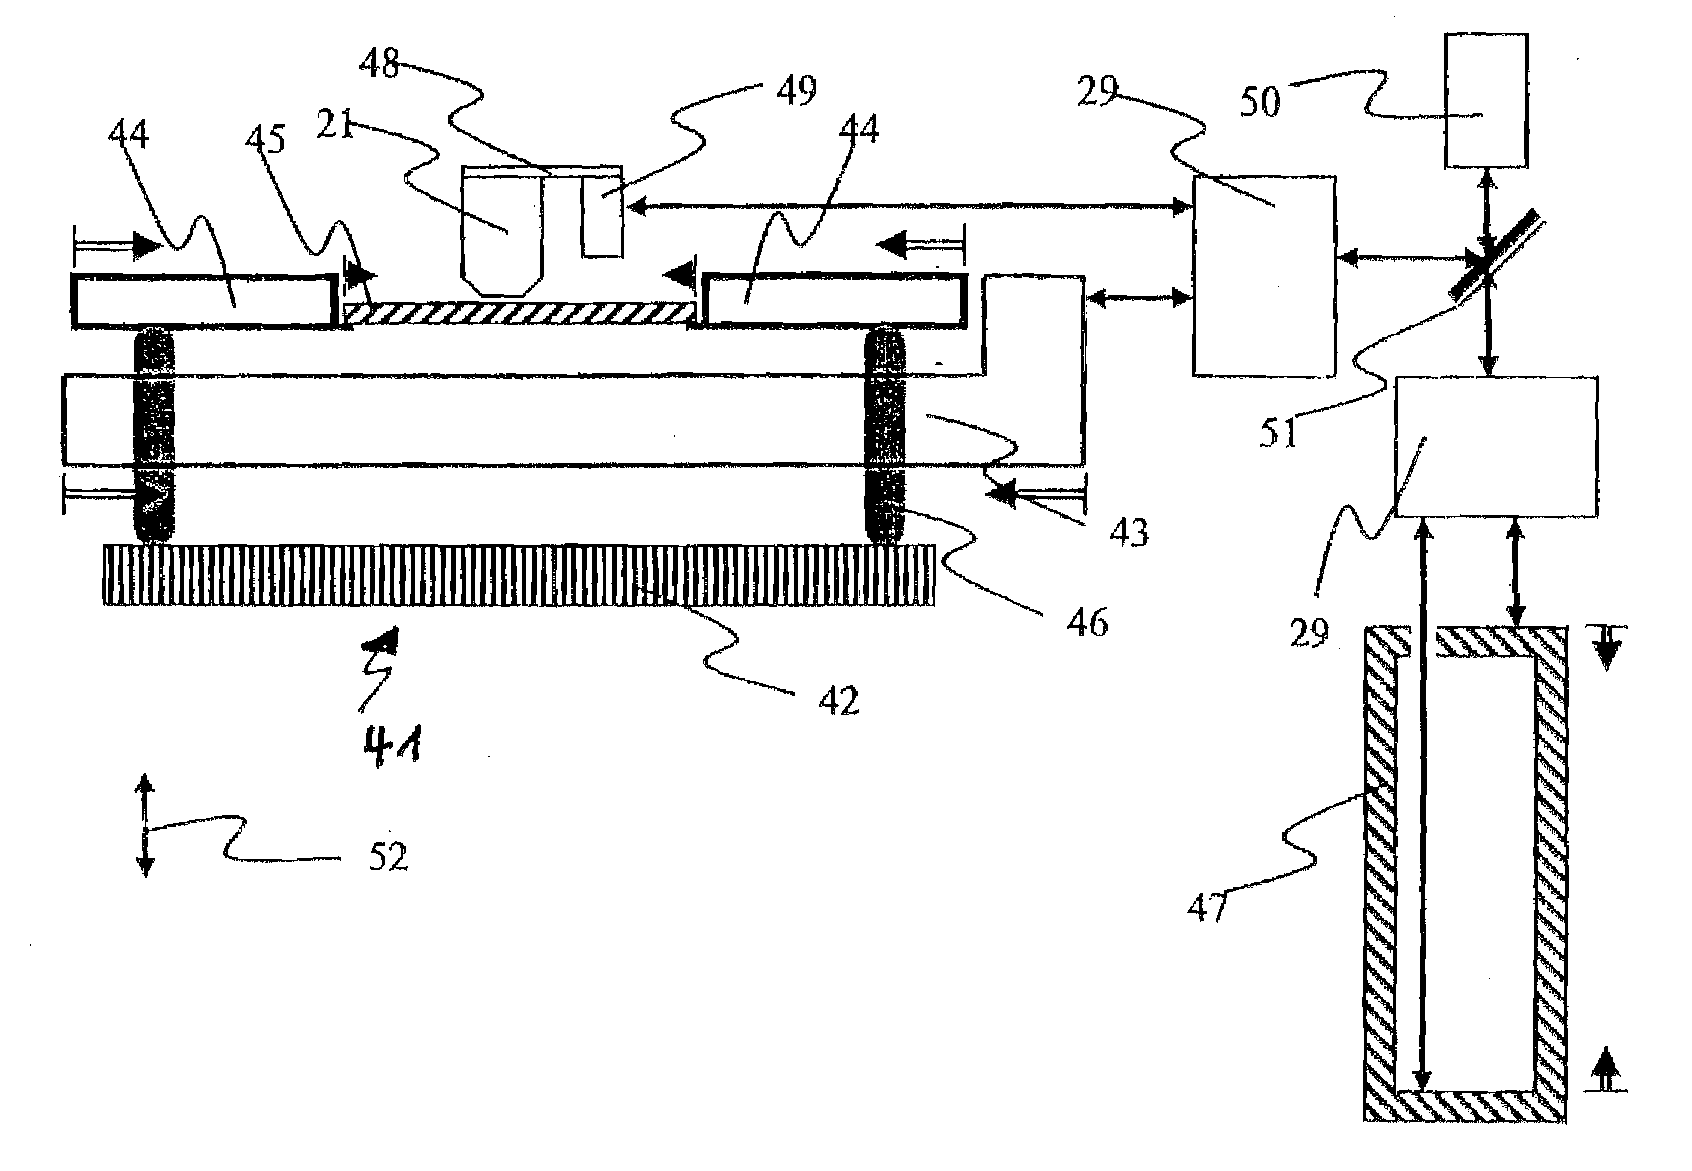 Substrate support apparatus for use in a position measuring device